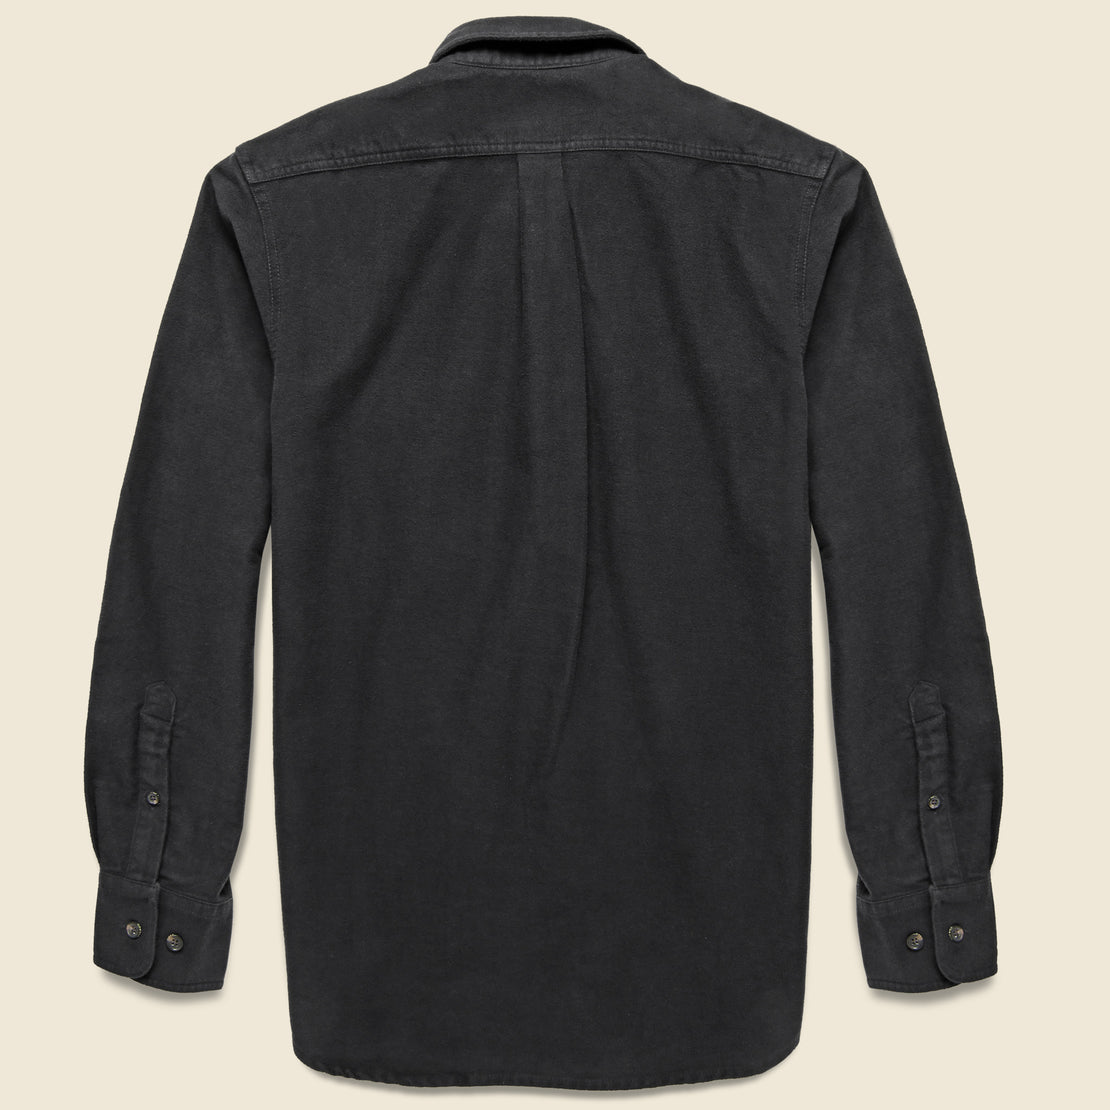 Moleskin Seattle Shirt - Black - Filson - STAG Provisions - Tops - L/S Woven - Solid